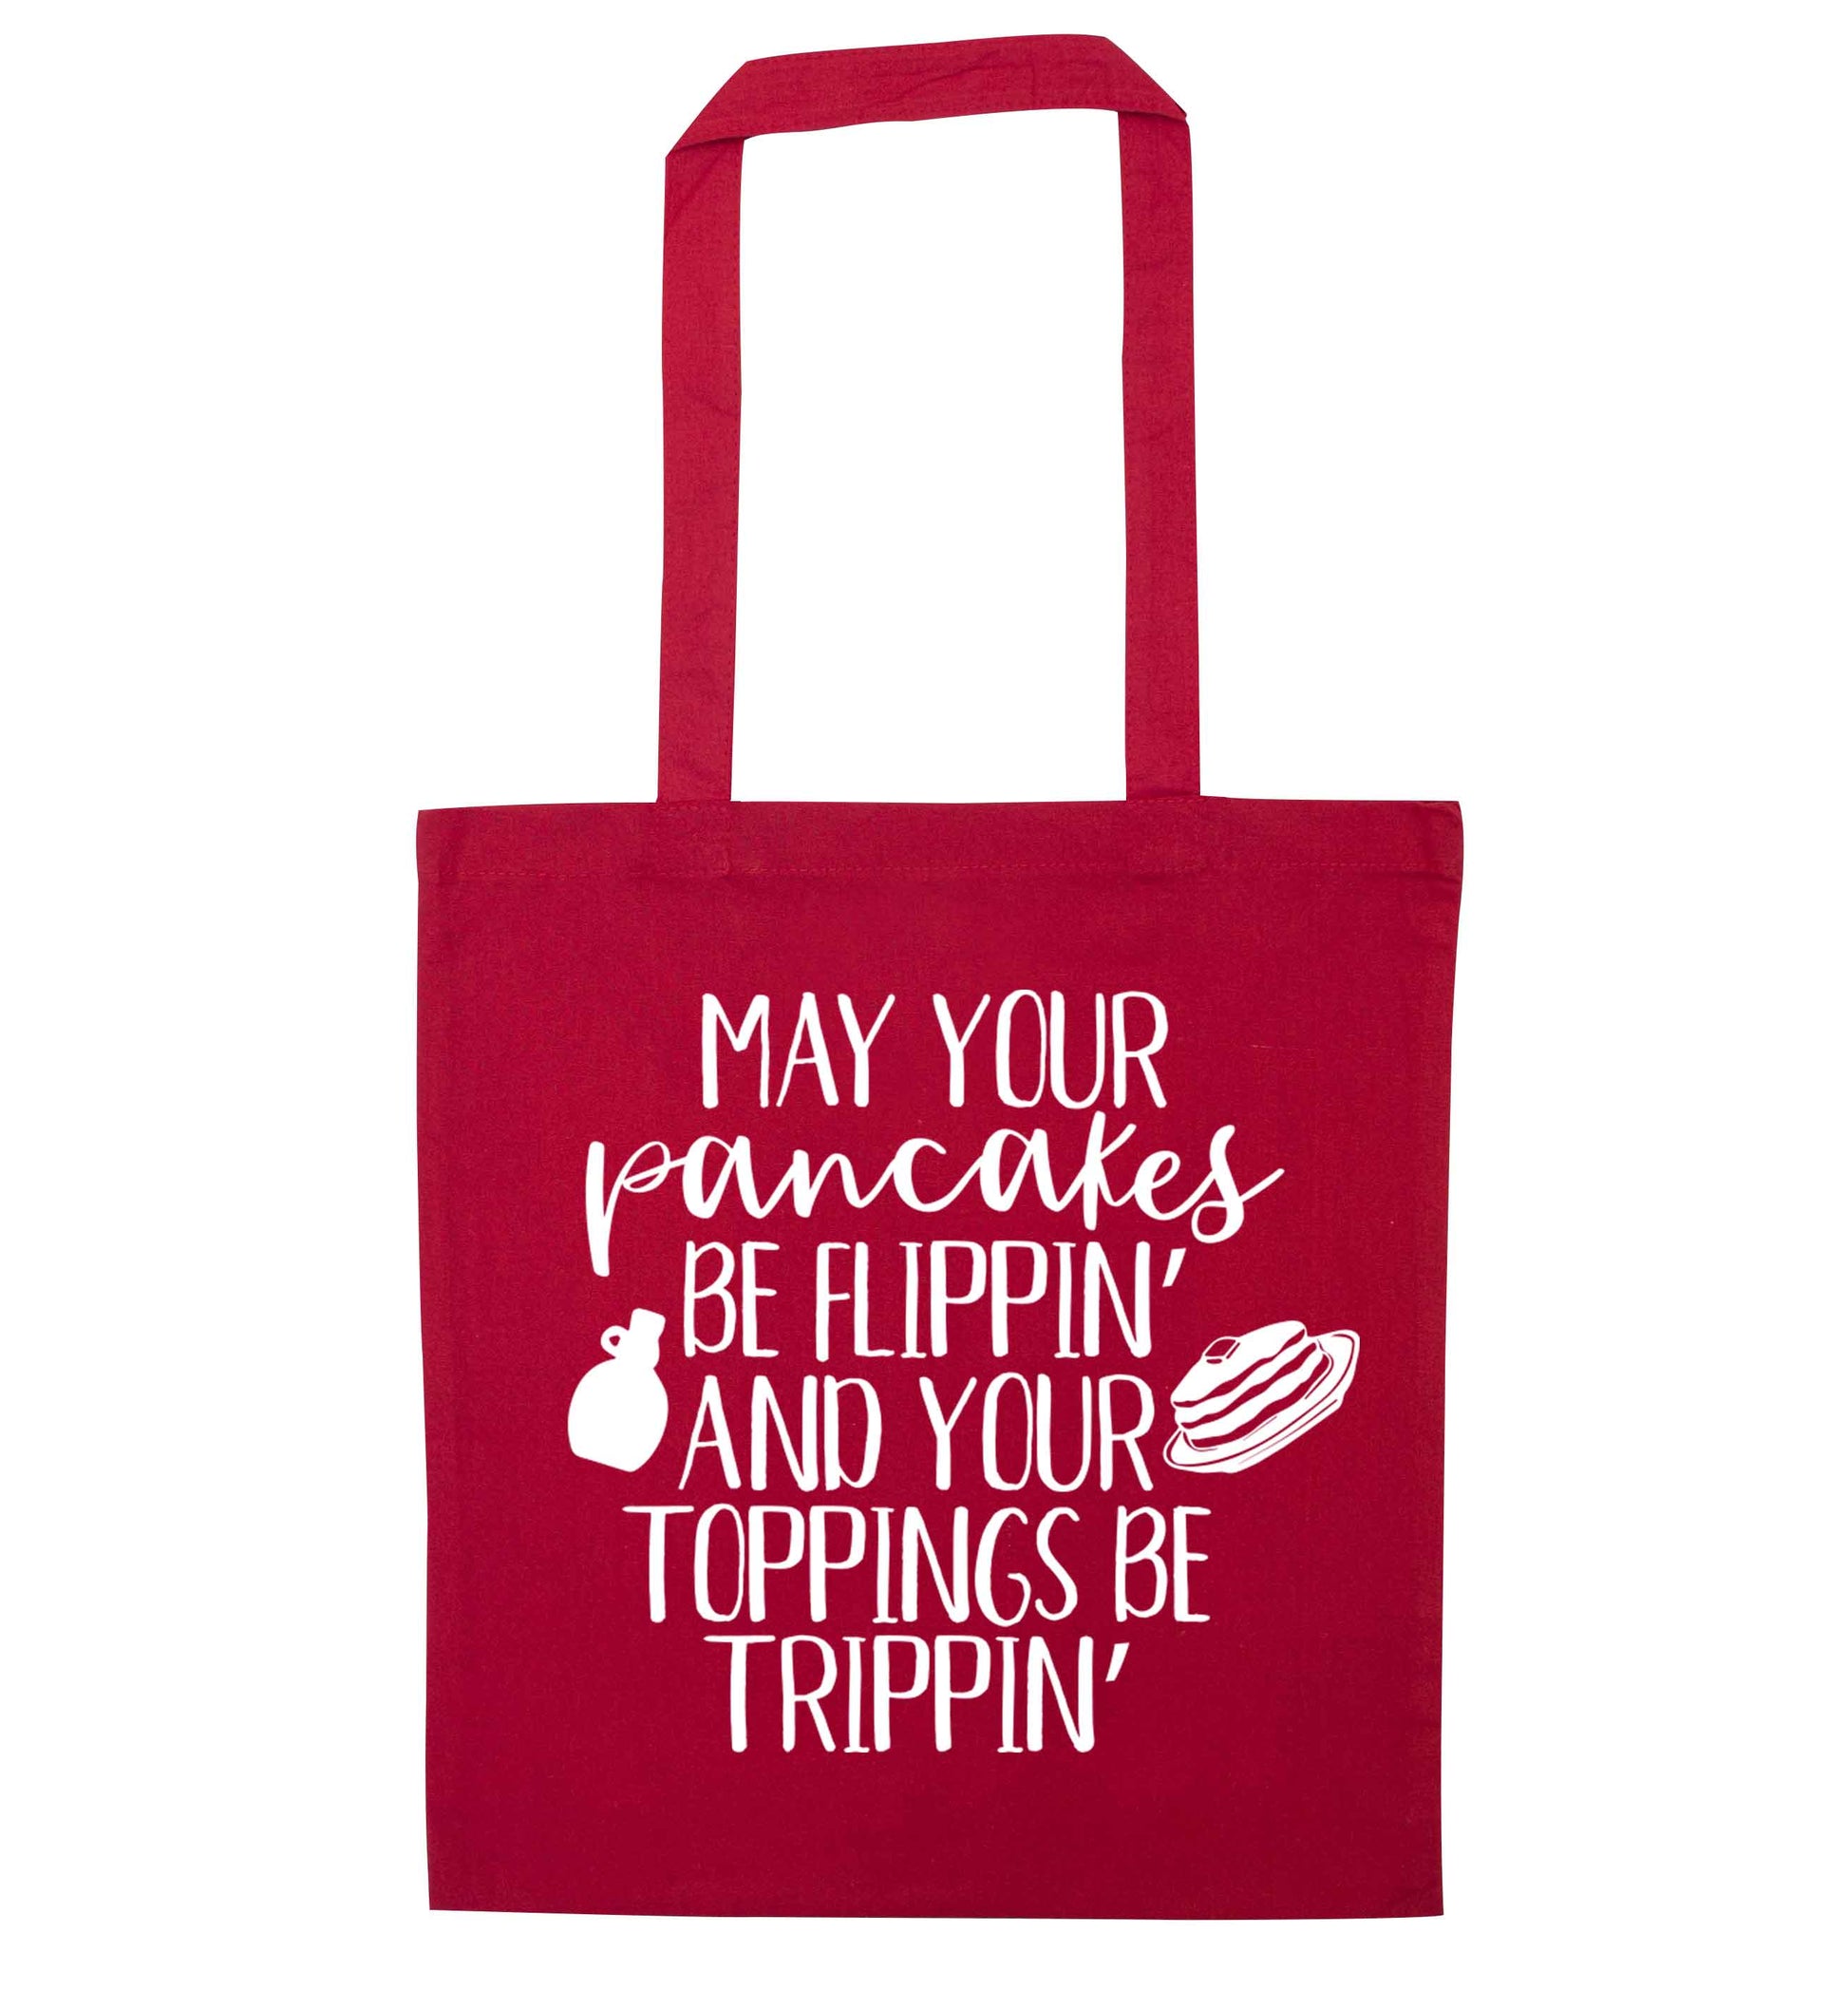 May your pancakes be flippin' and your toppings be trippin' red tote bag